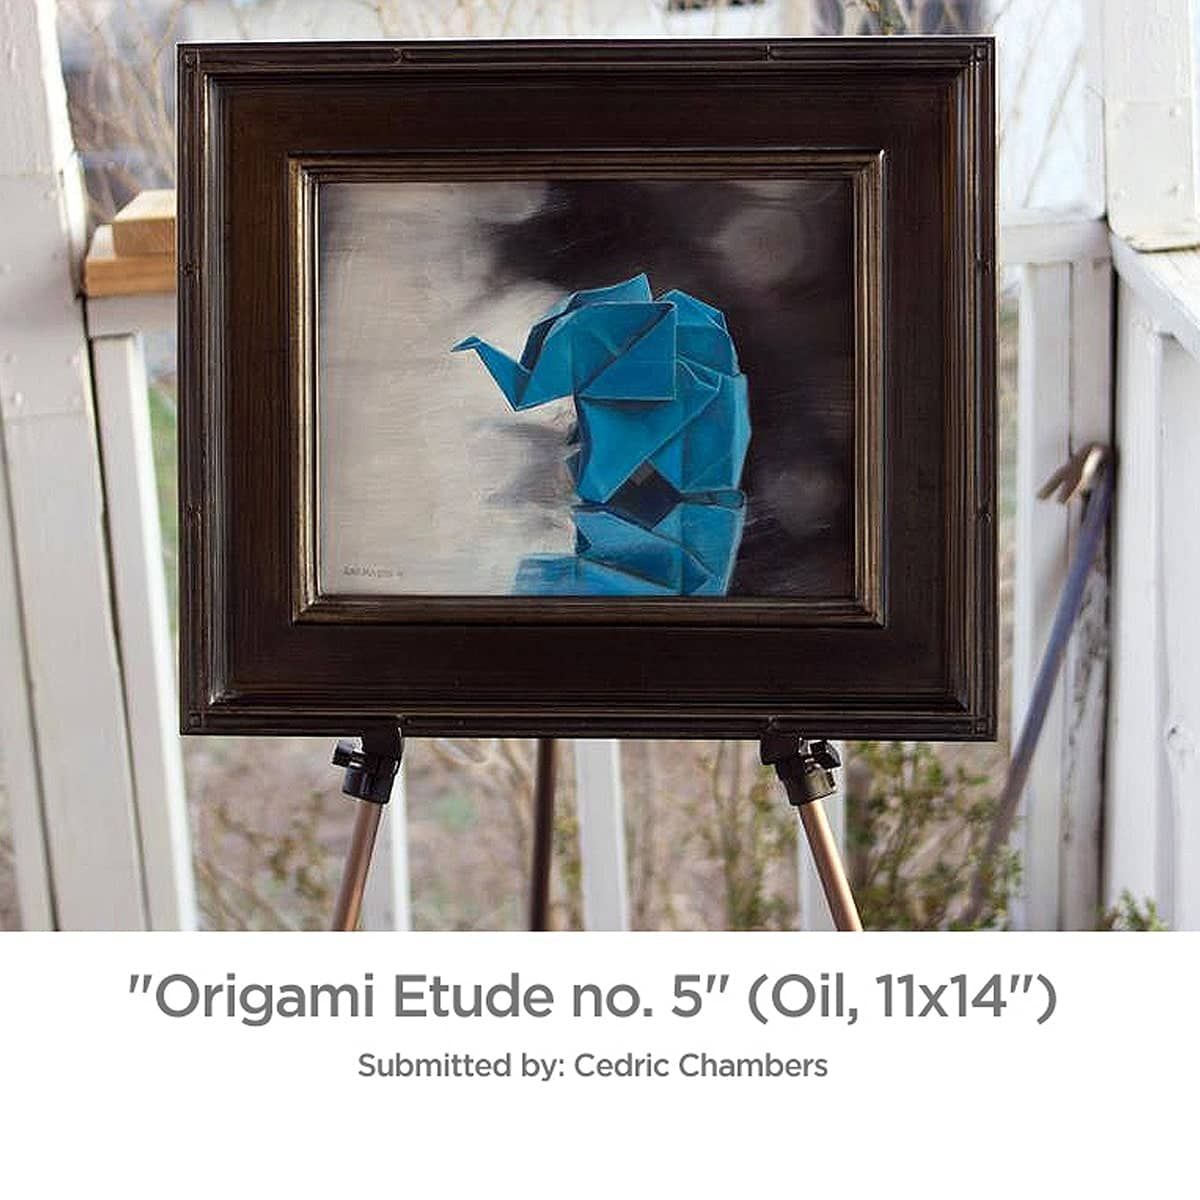 Origami Etude no. 5" (Oil, 11x14in) from customer Cedric Chambers